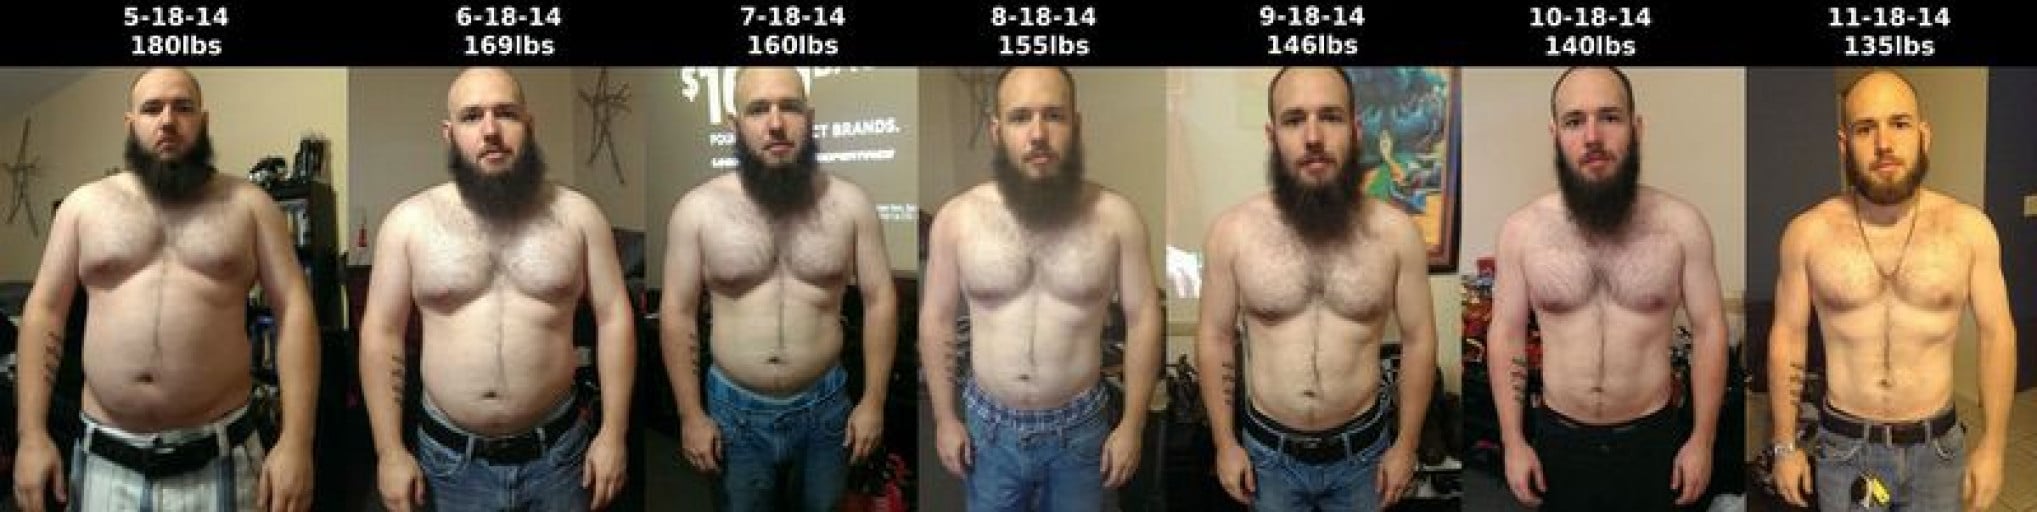 5 foot 3 Male Before and After 45 lbs Fat Loss 180 lbs to 135 lbs